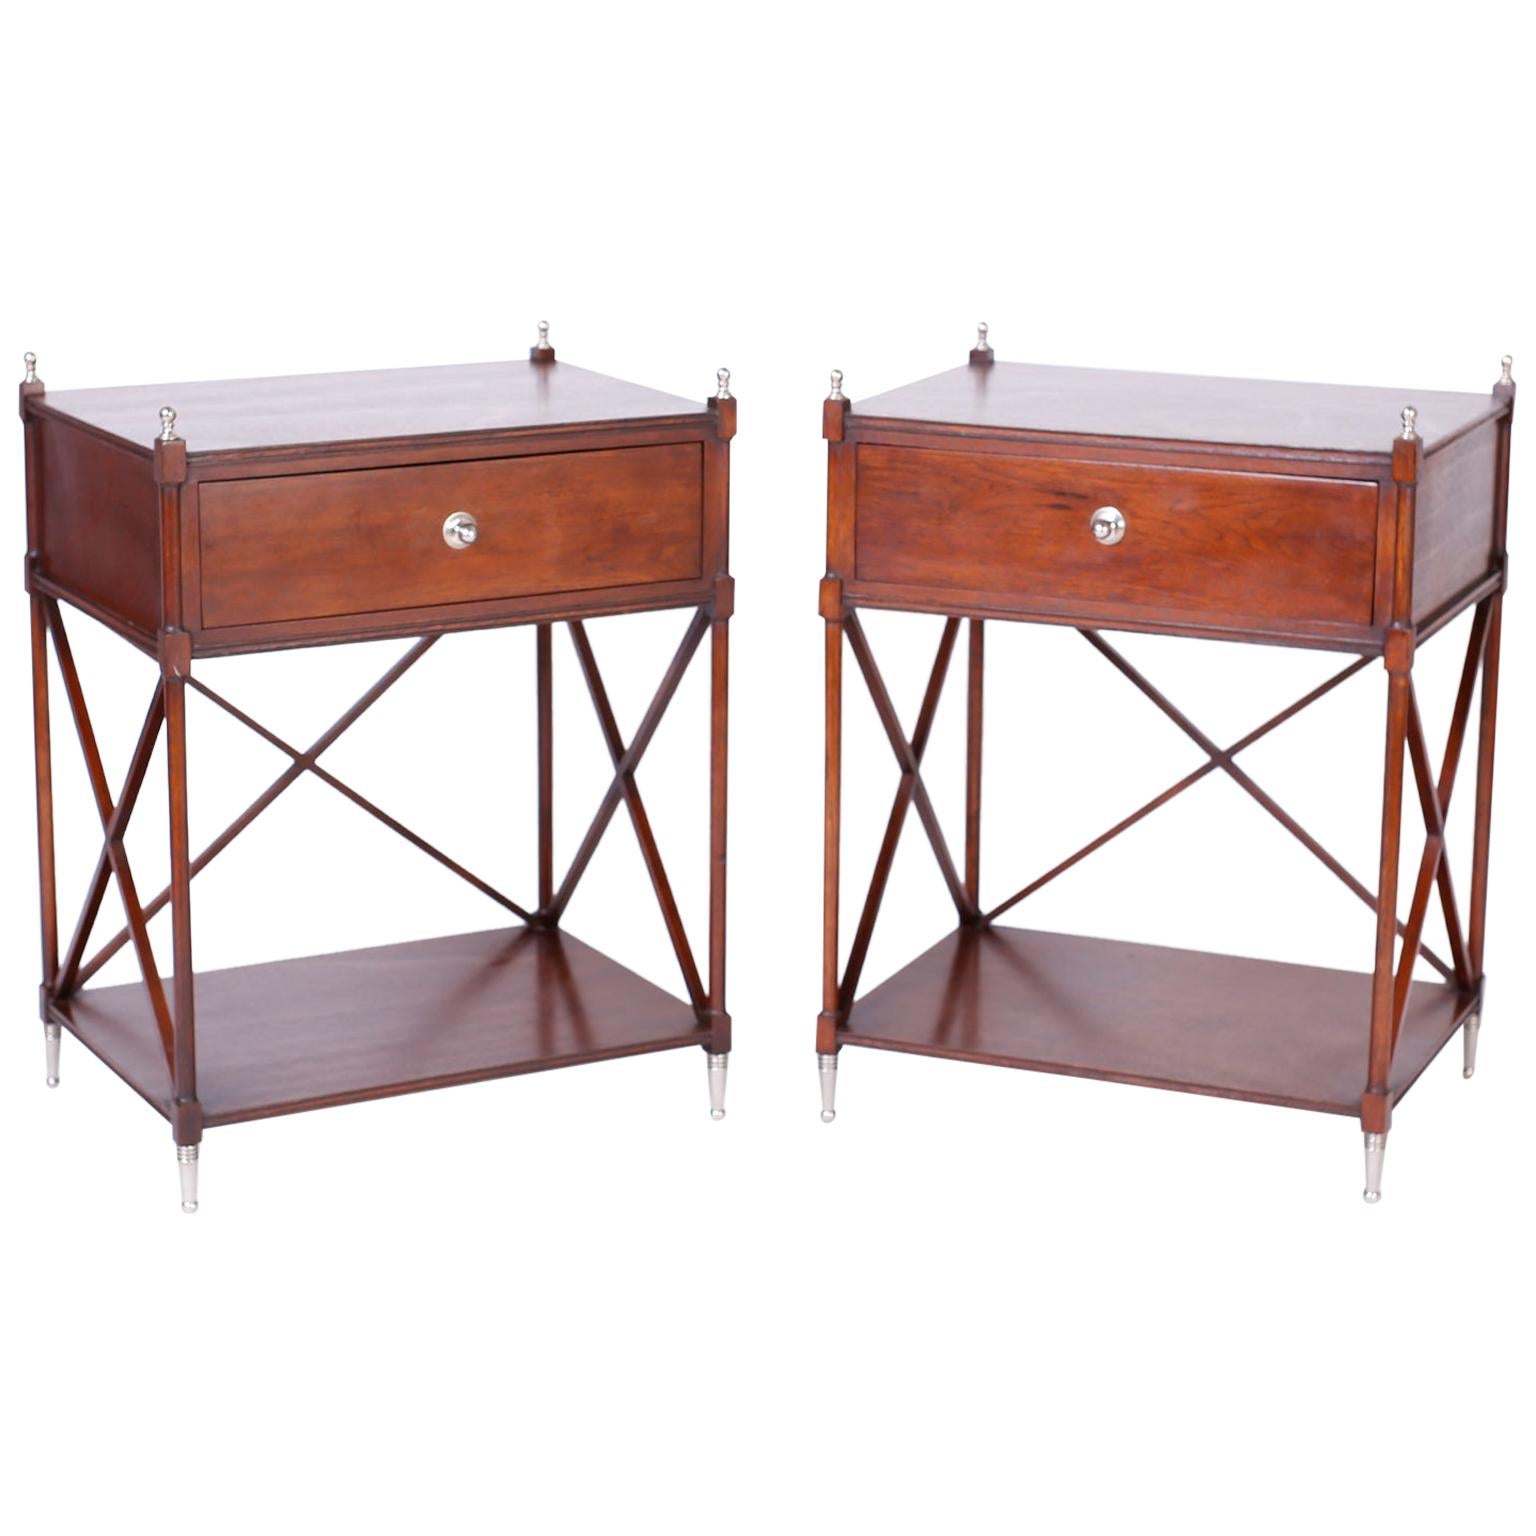 Pair of Neoclassic Stands or Tables